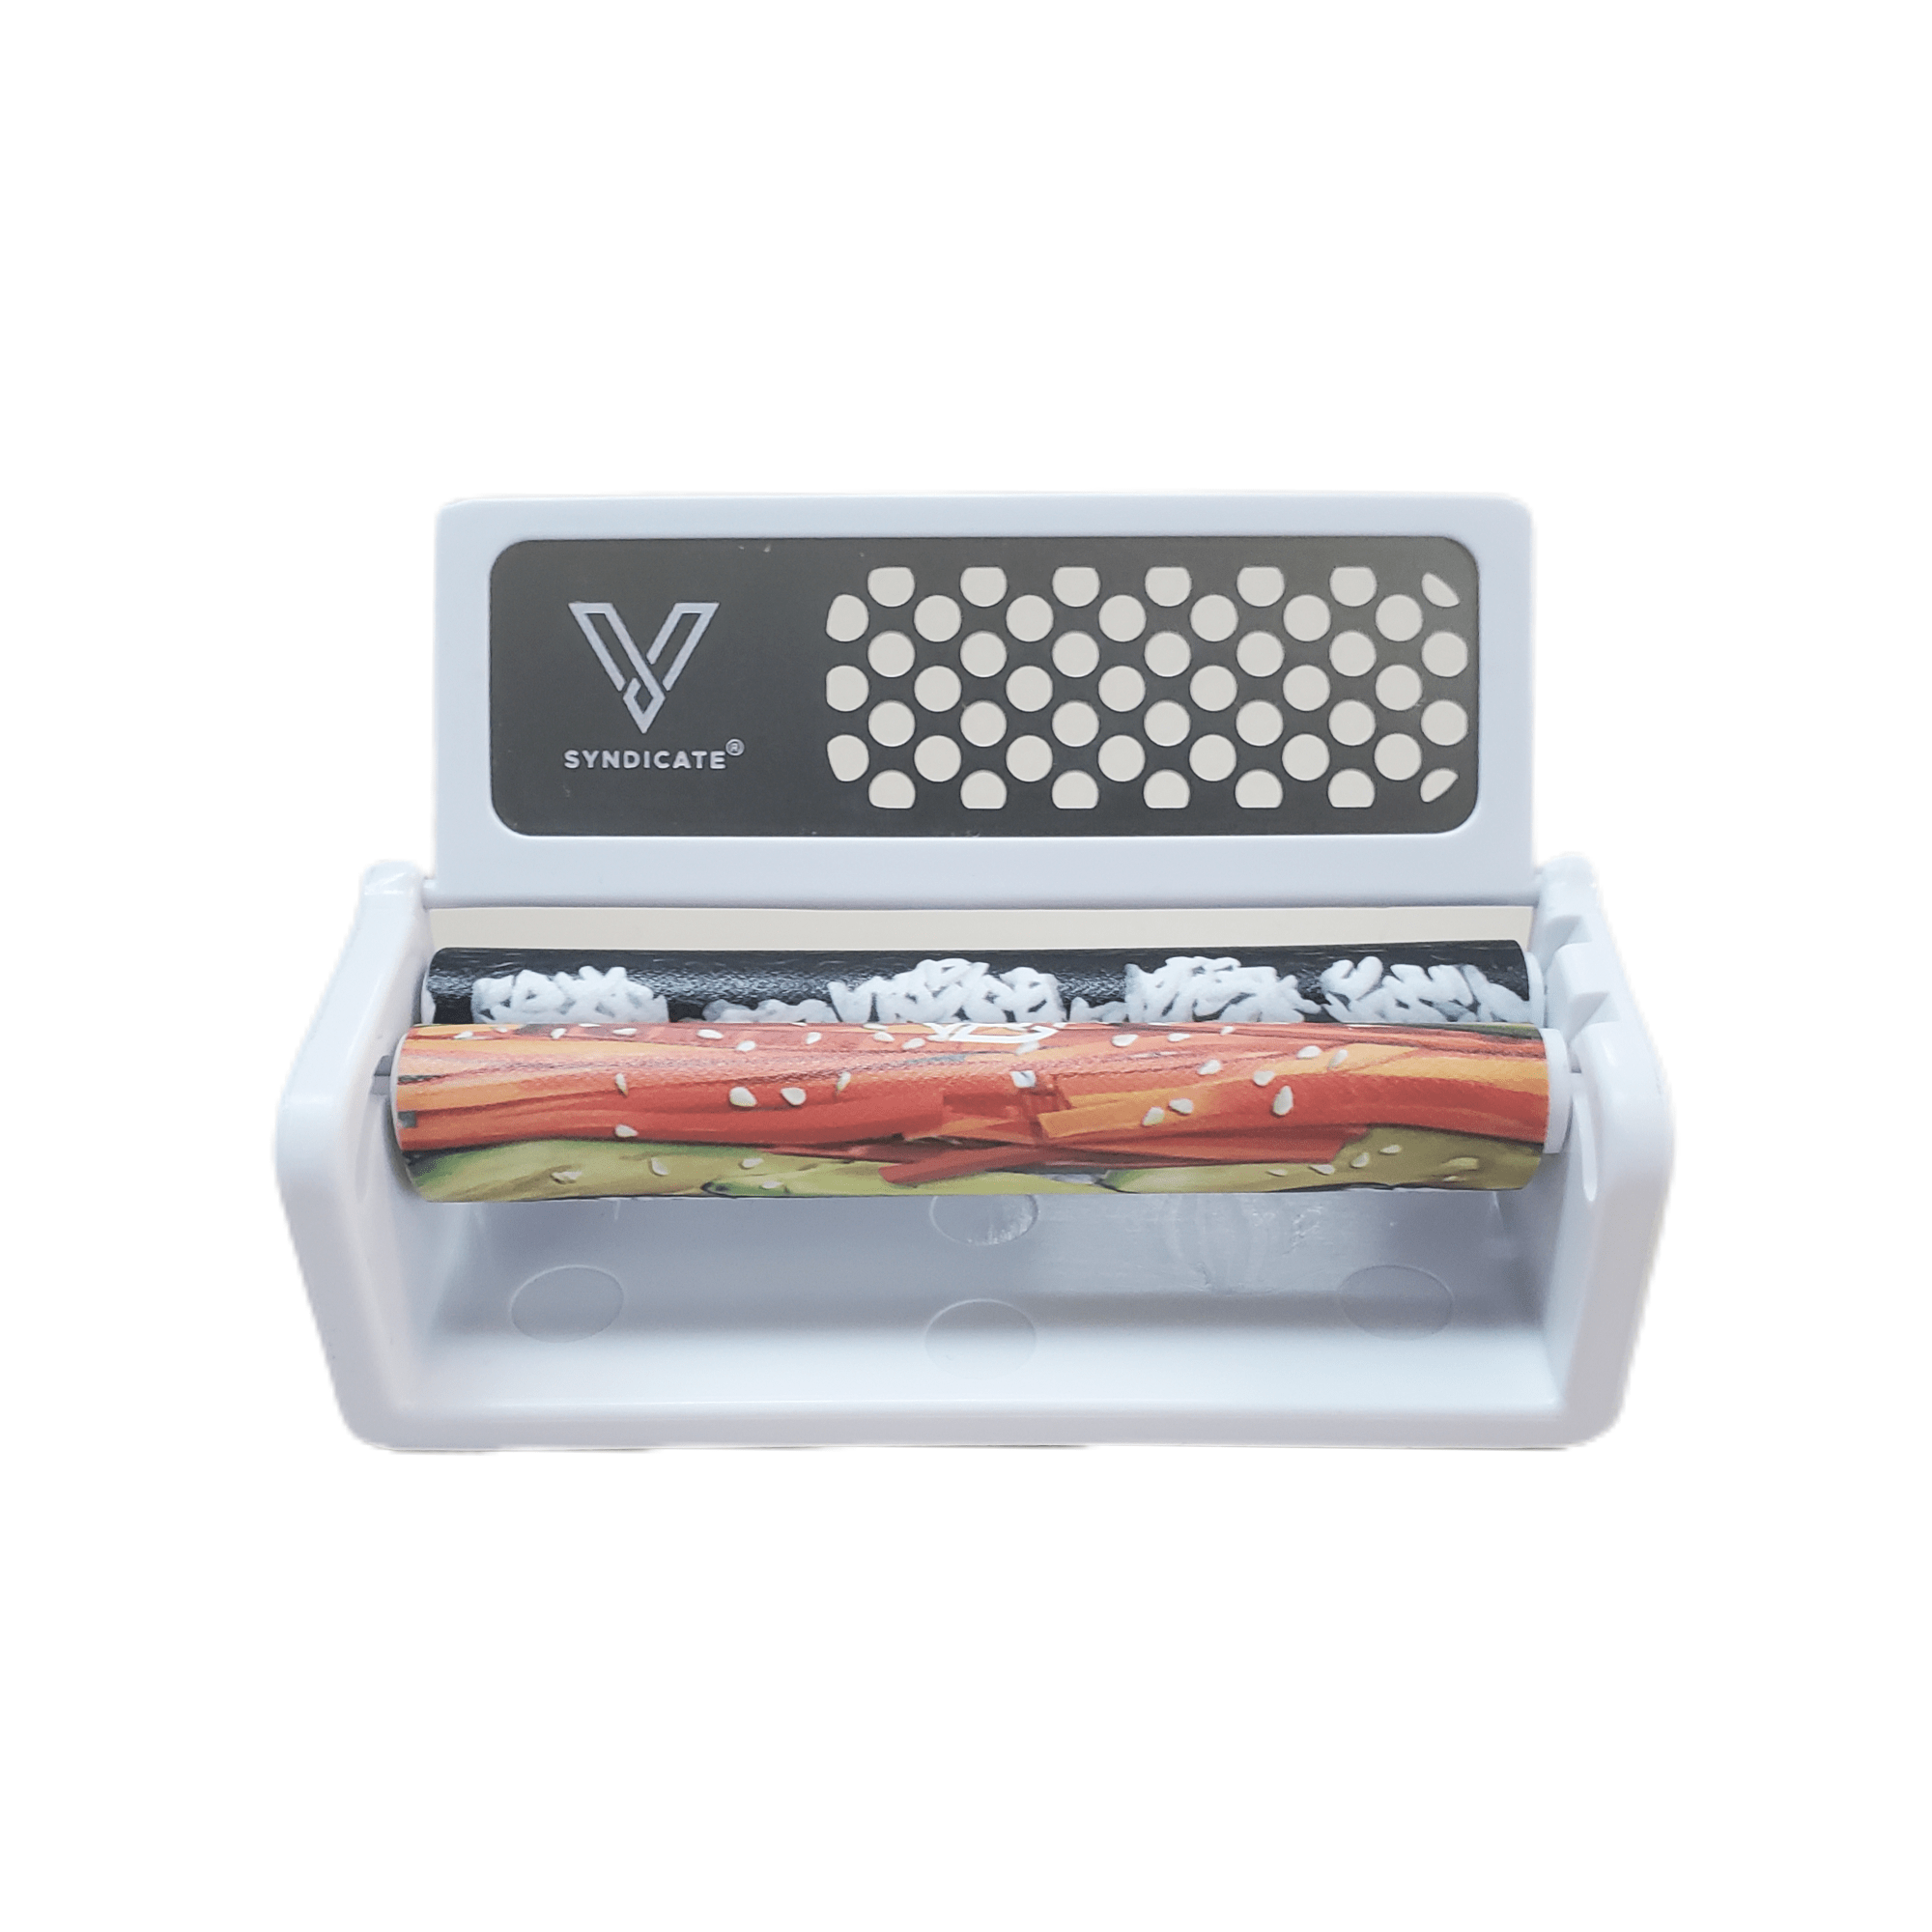 V Syndicate White Crunch Roll (Rolling Machine w/ Grinder Surface)